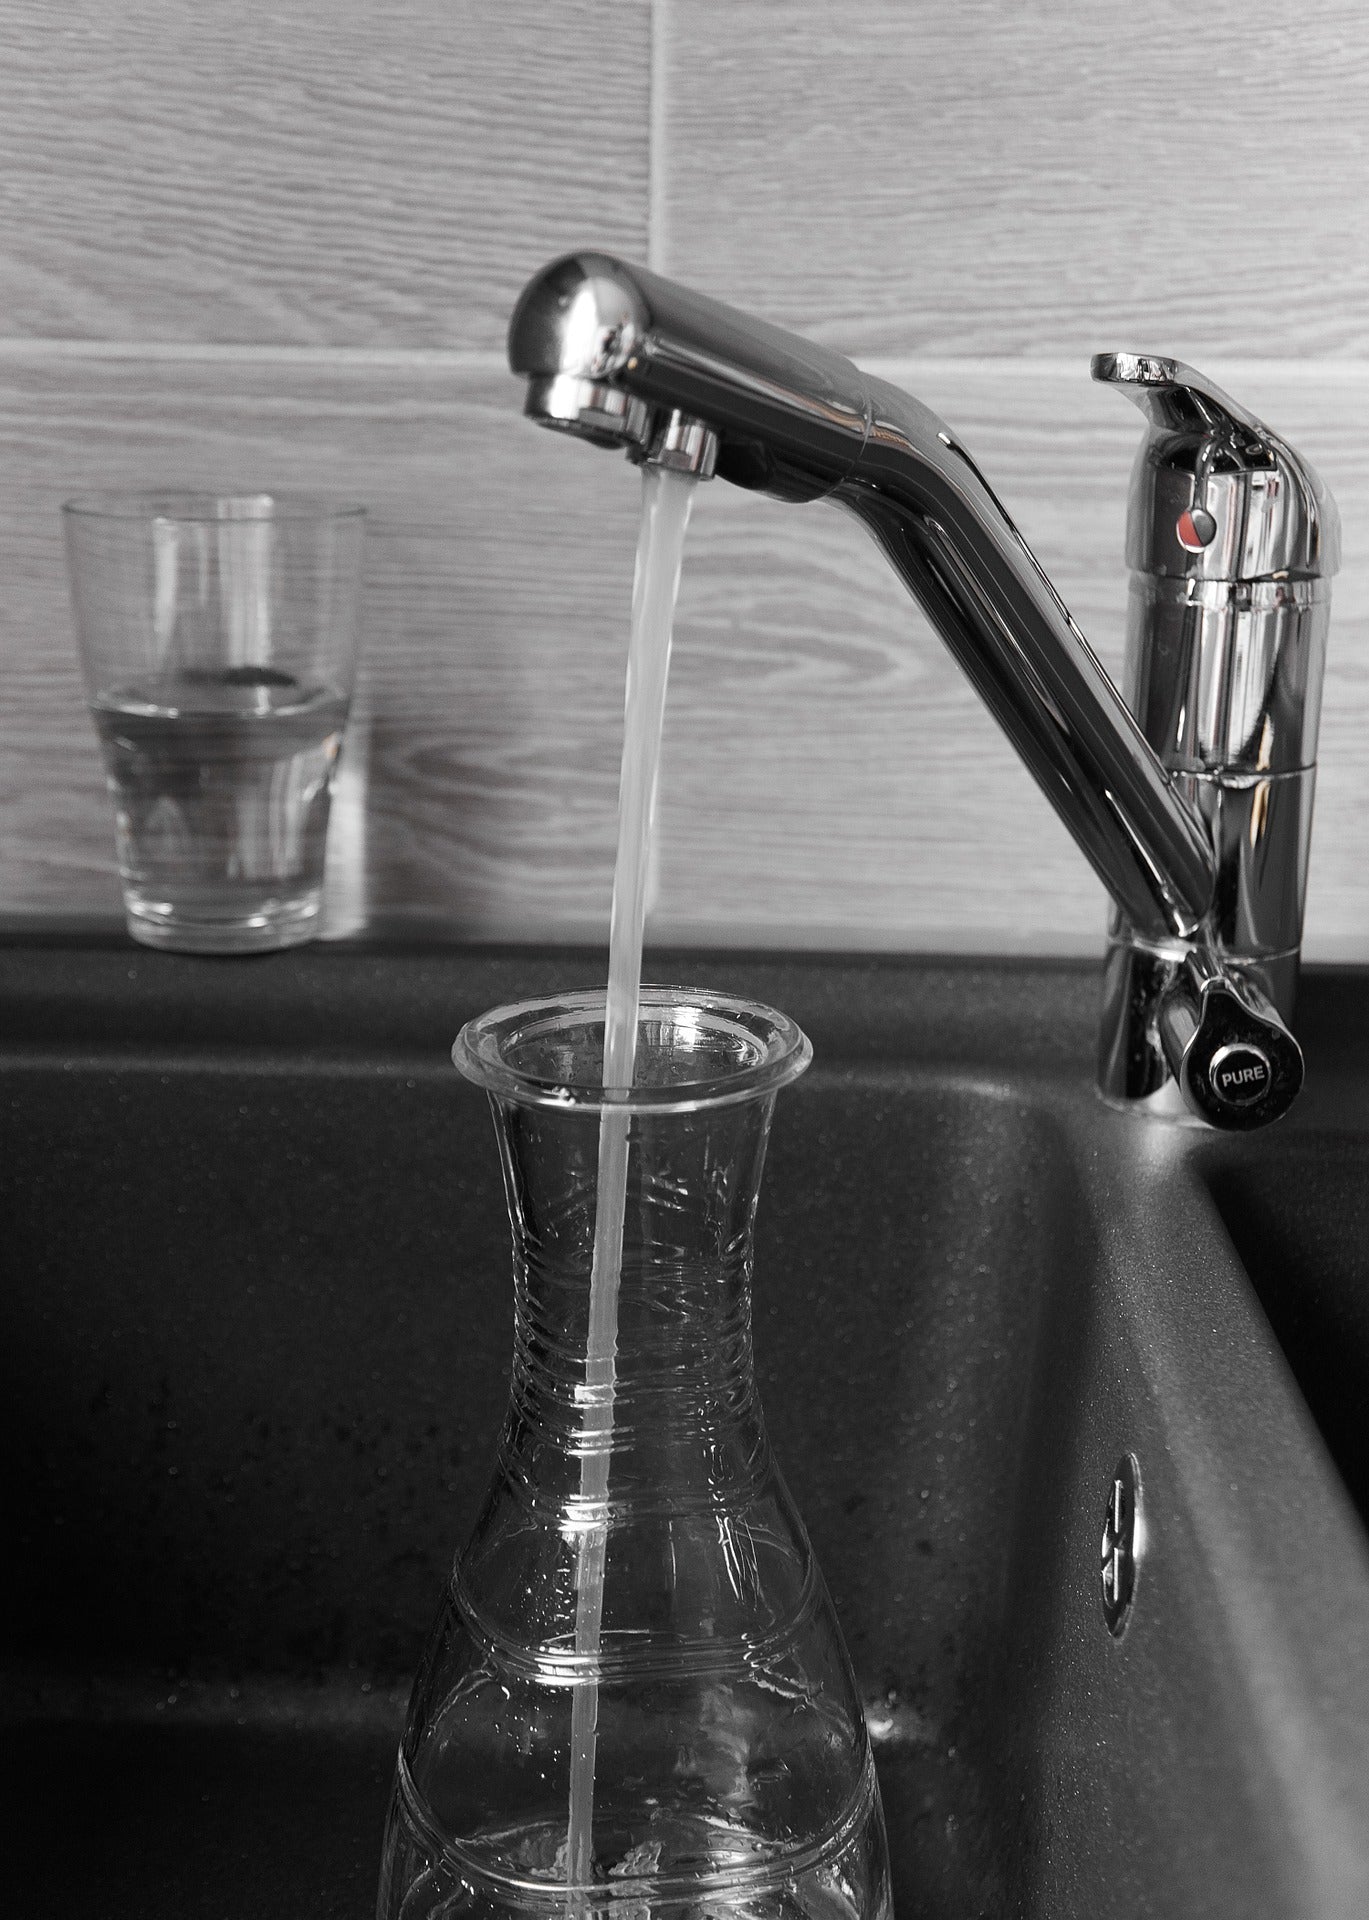 How Much Does it Cost to Install a Water Softener?